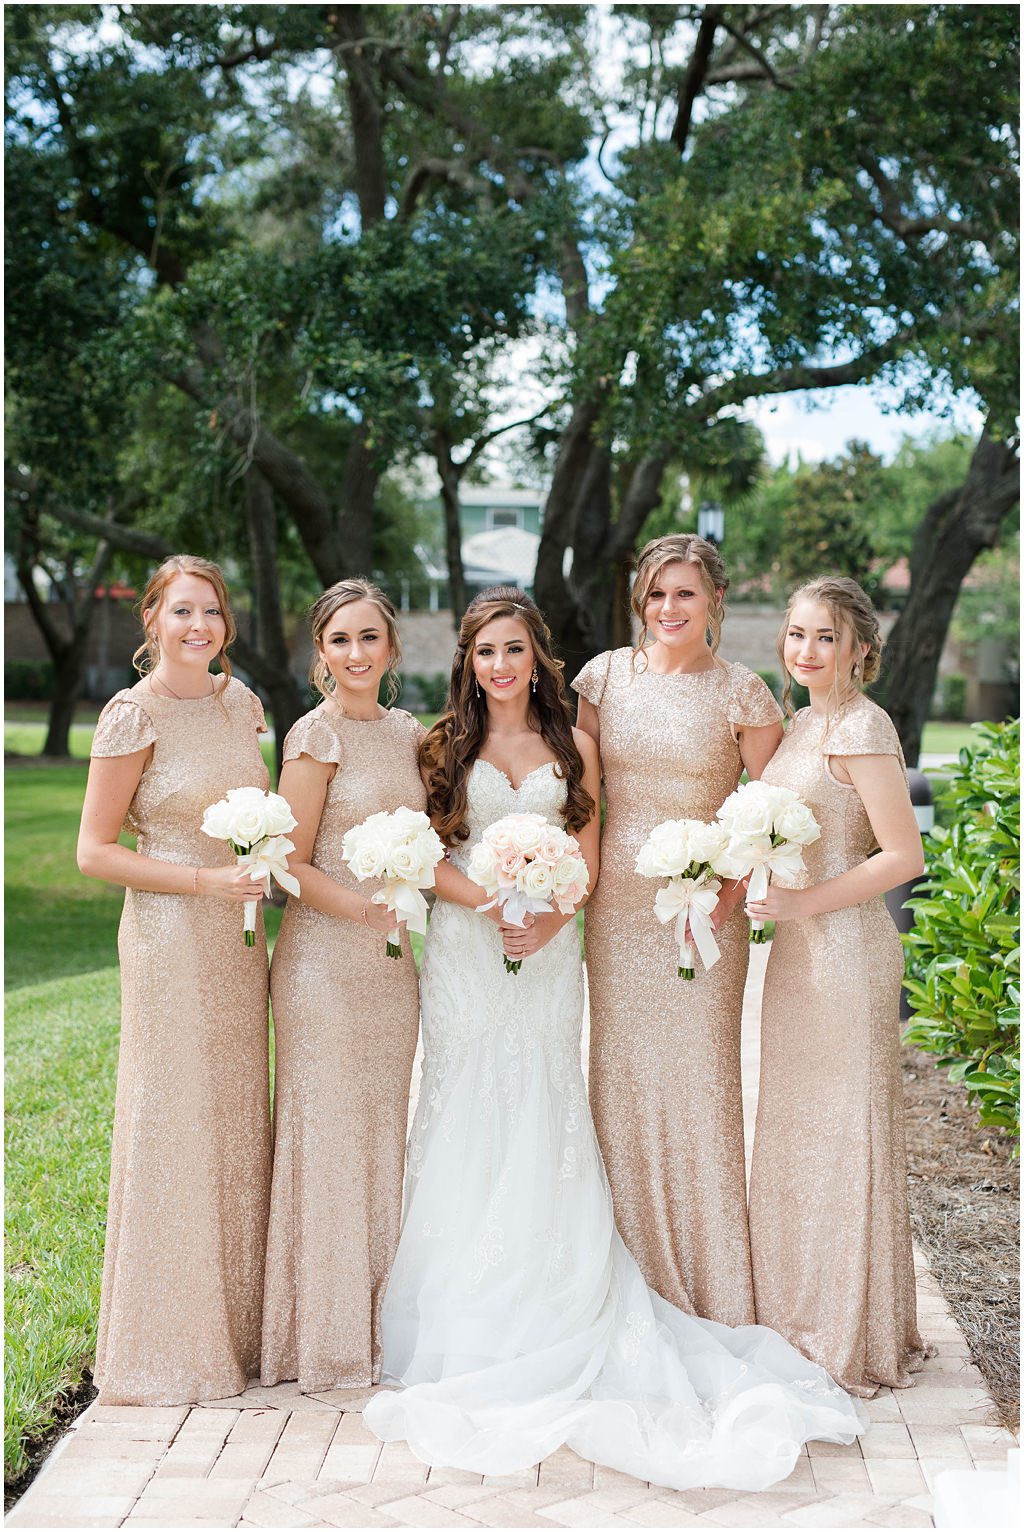 Tampa Vintage Glam Wedding Champagne Blush Rose Gold Sequin Bridesmaid Dresses White Ivory Bouquets Embroidered Sweetheart Wedding Gown Bride Hanger Stella York